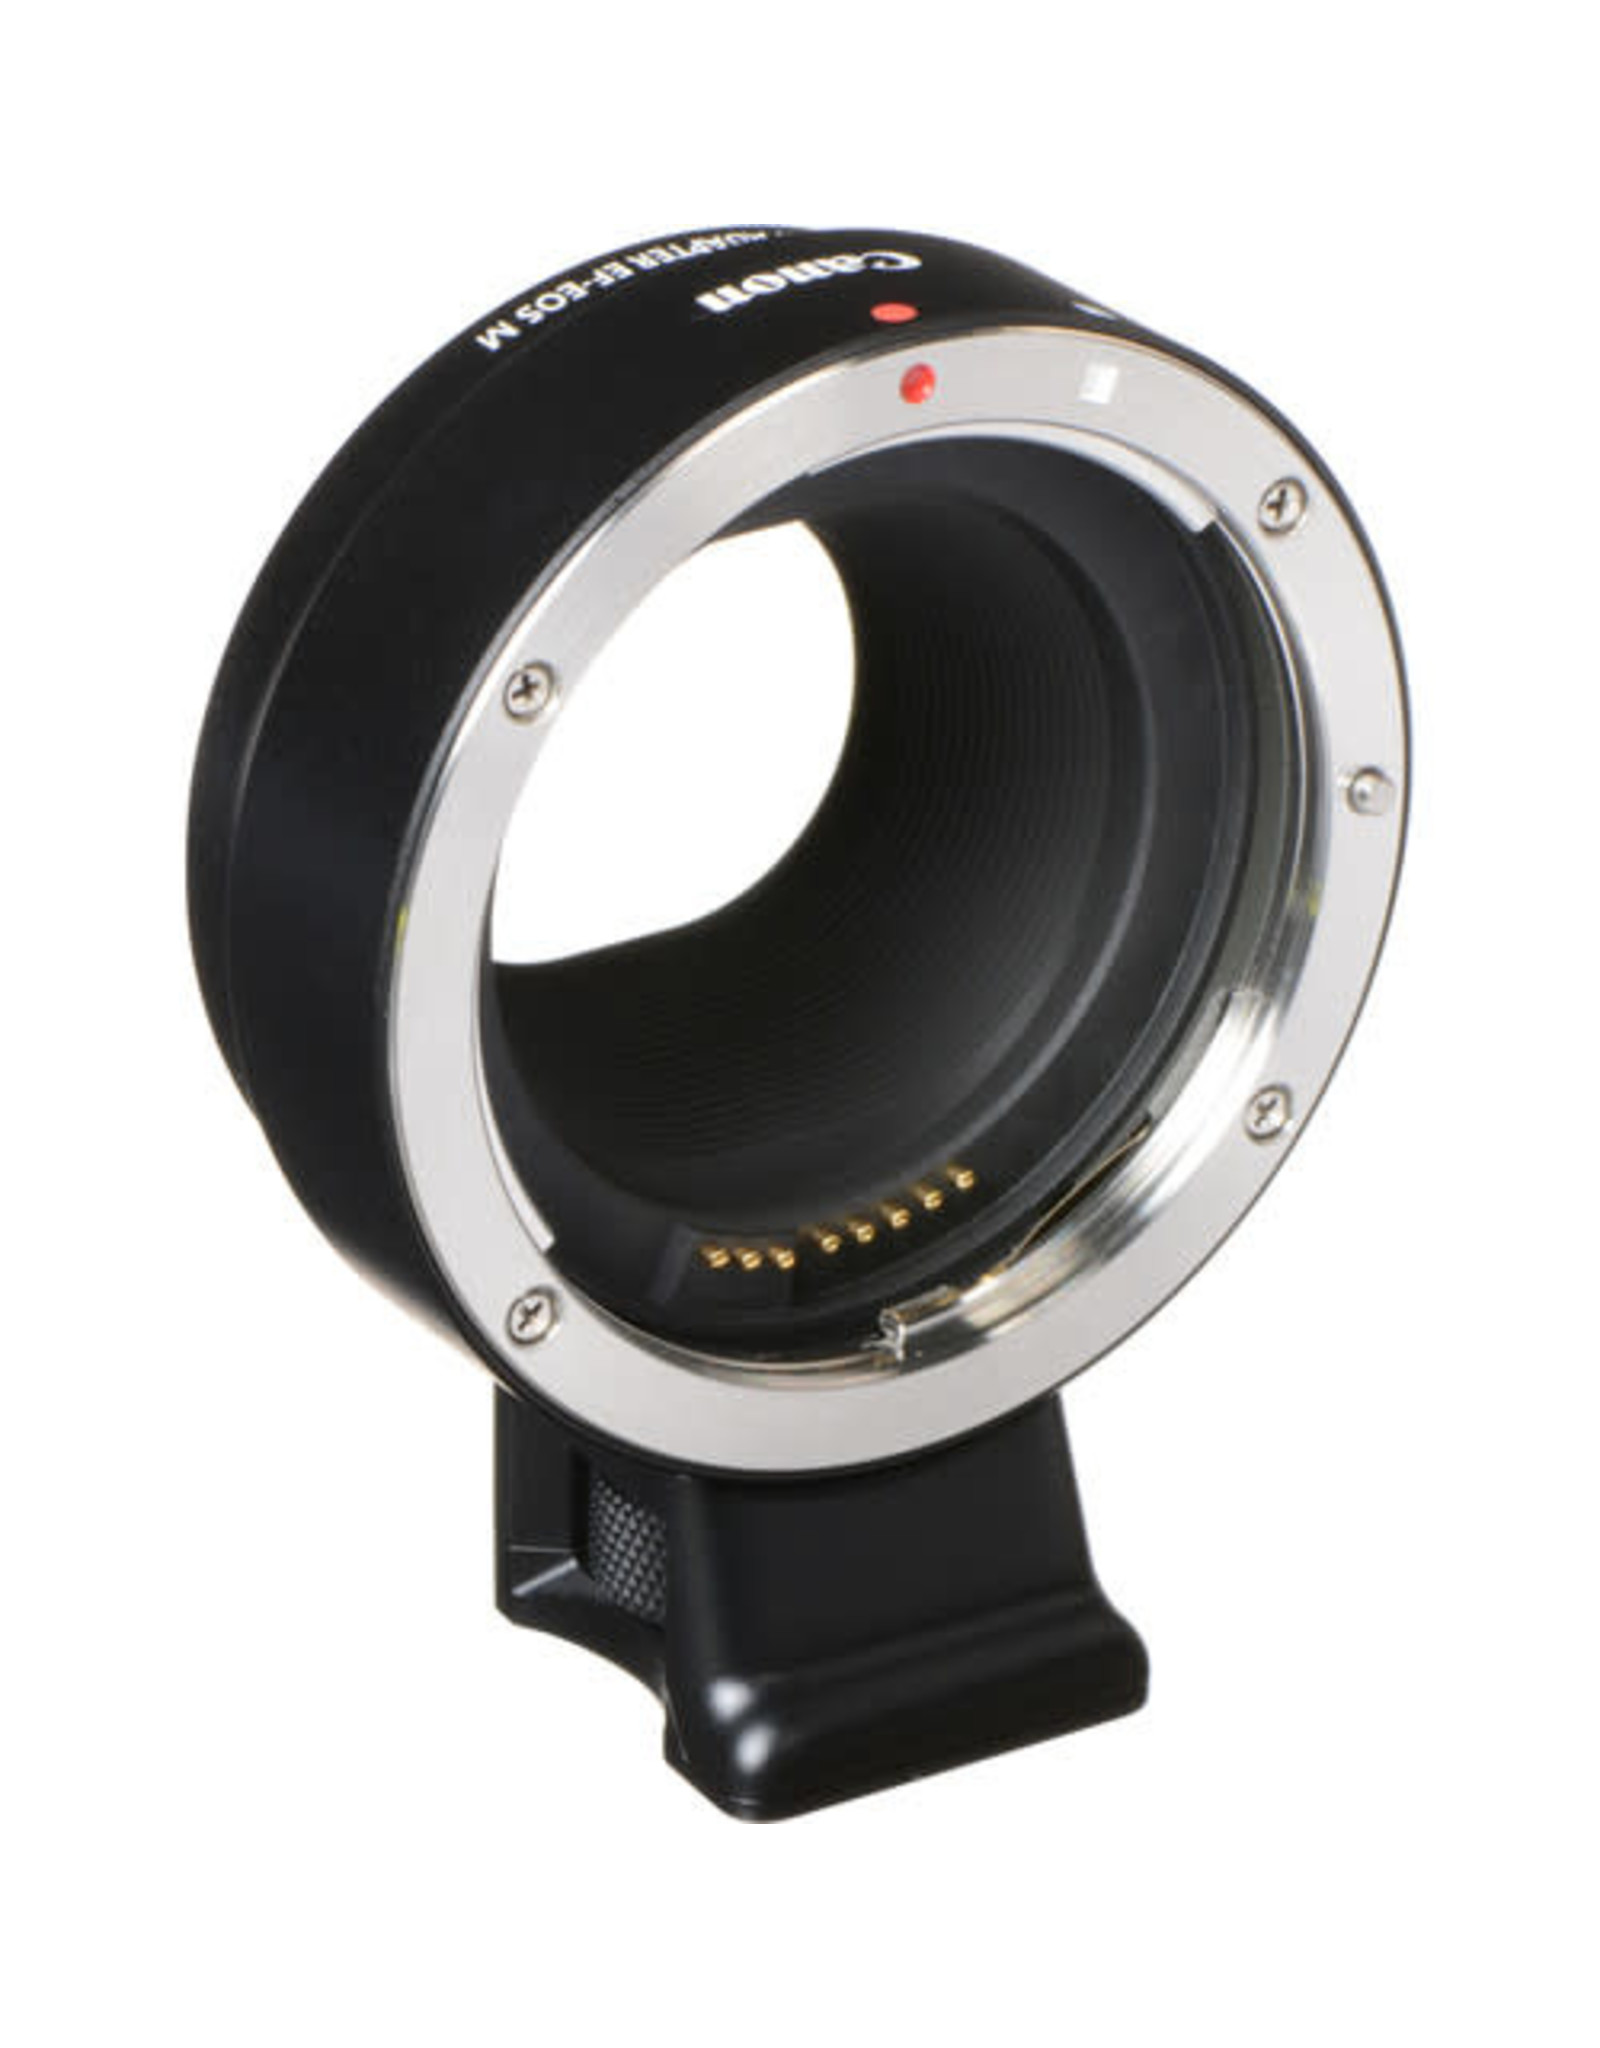 Canon Canon  Mount Adapter  (Canon EF  Lens to EF-M Body)